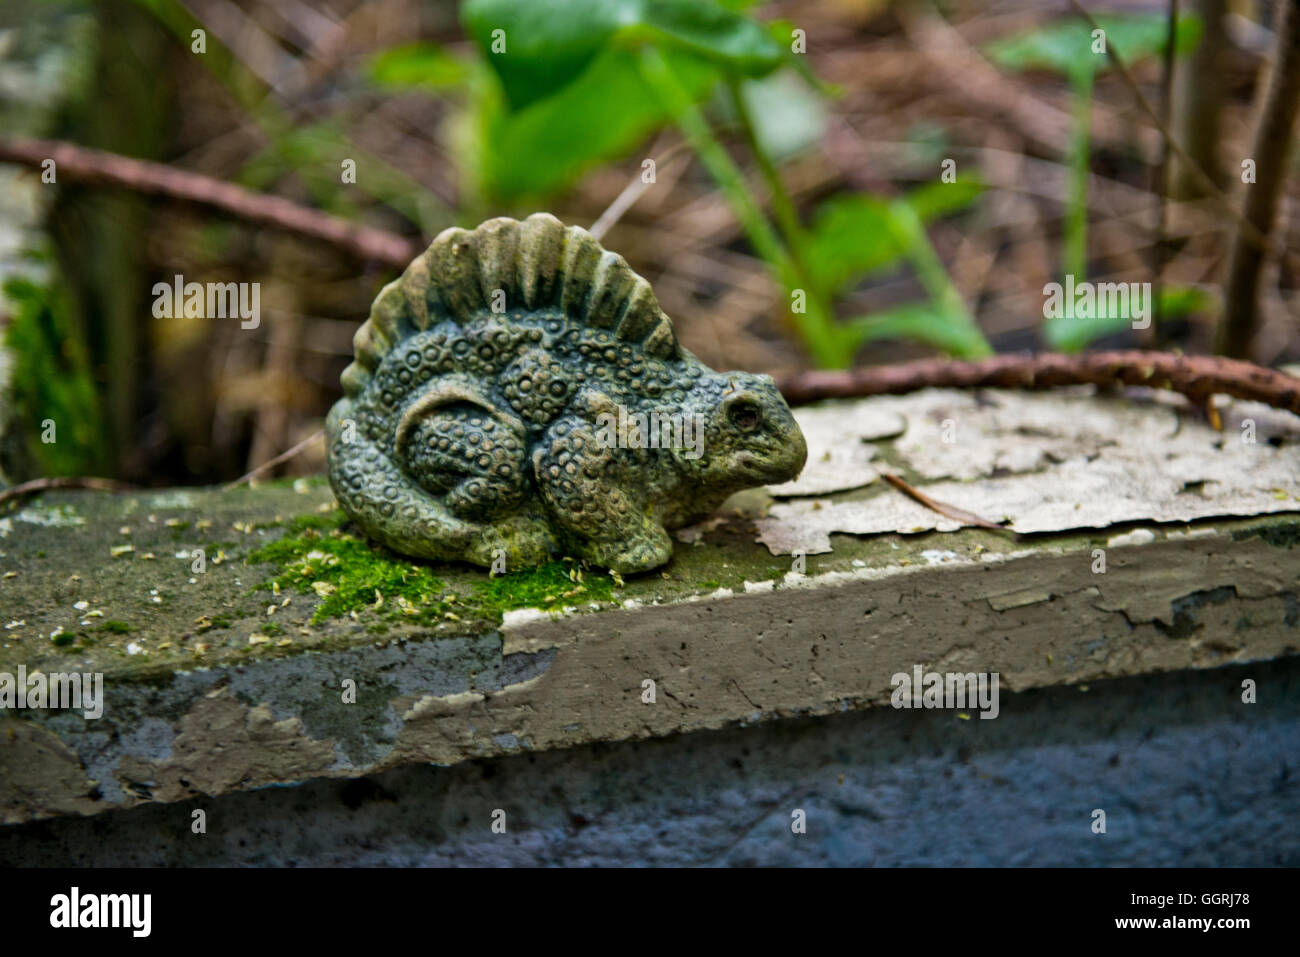 Small garden ornament of a Dinosaur found with the overgrown grounds of St Clements Hospital, East End of London. Stock Photo